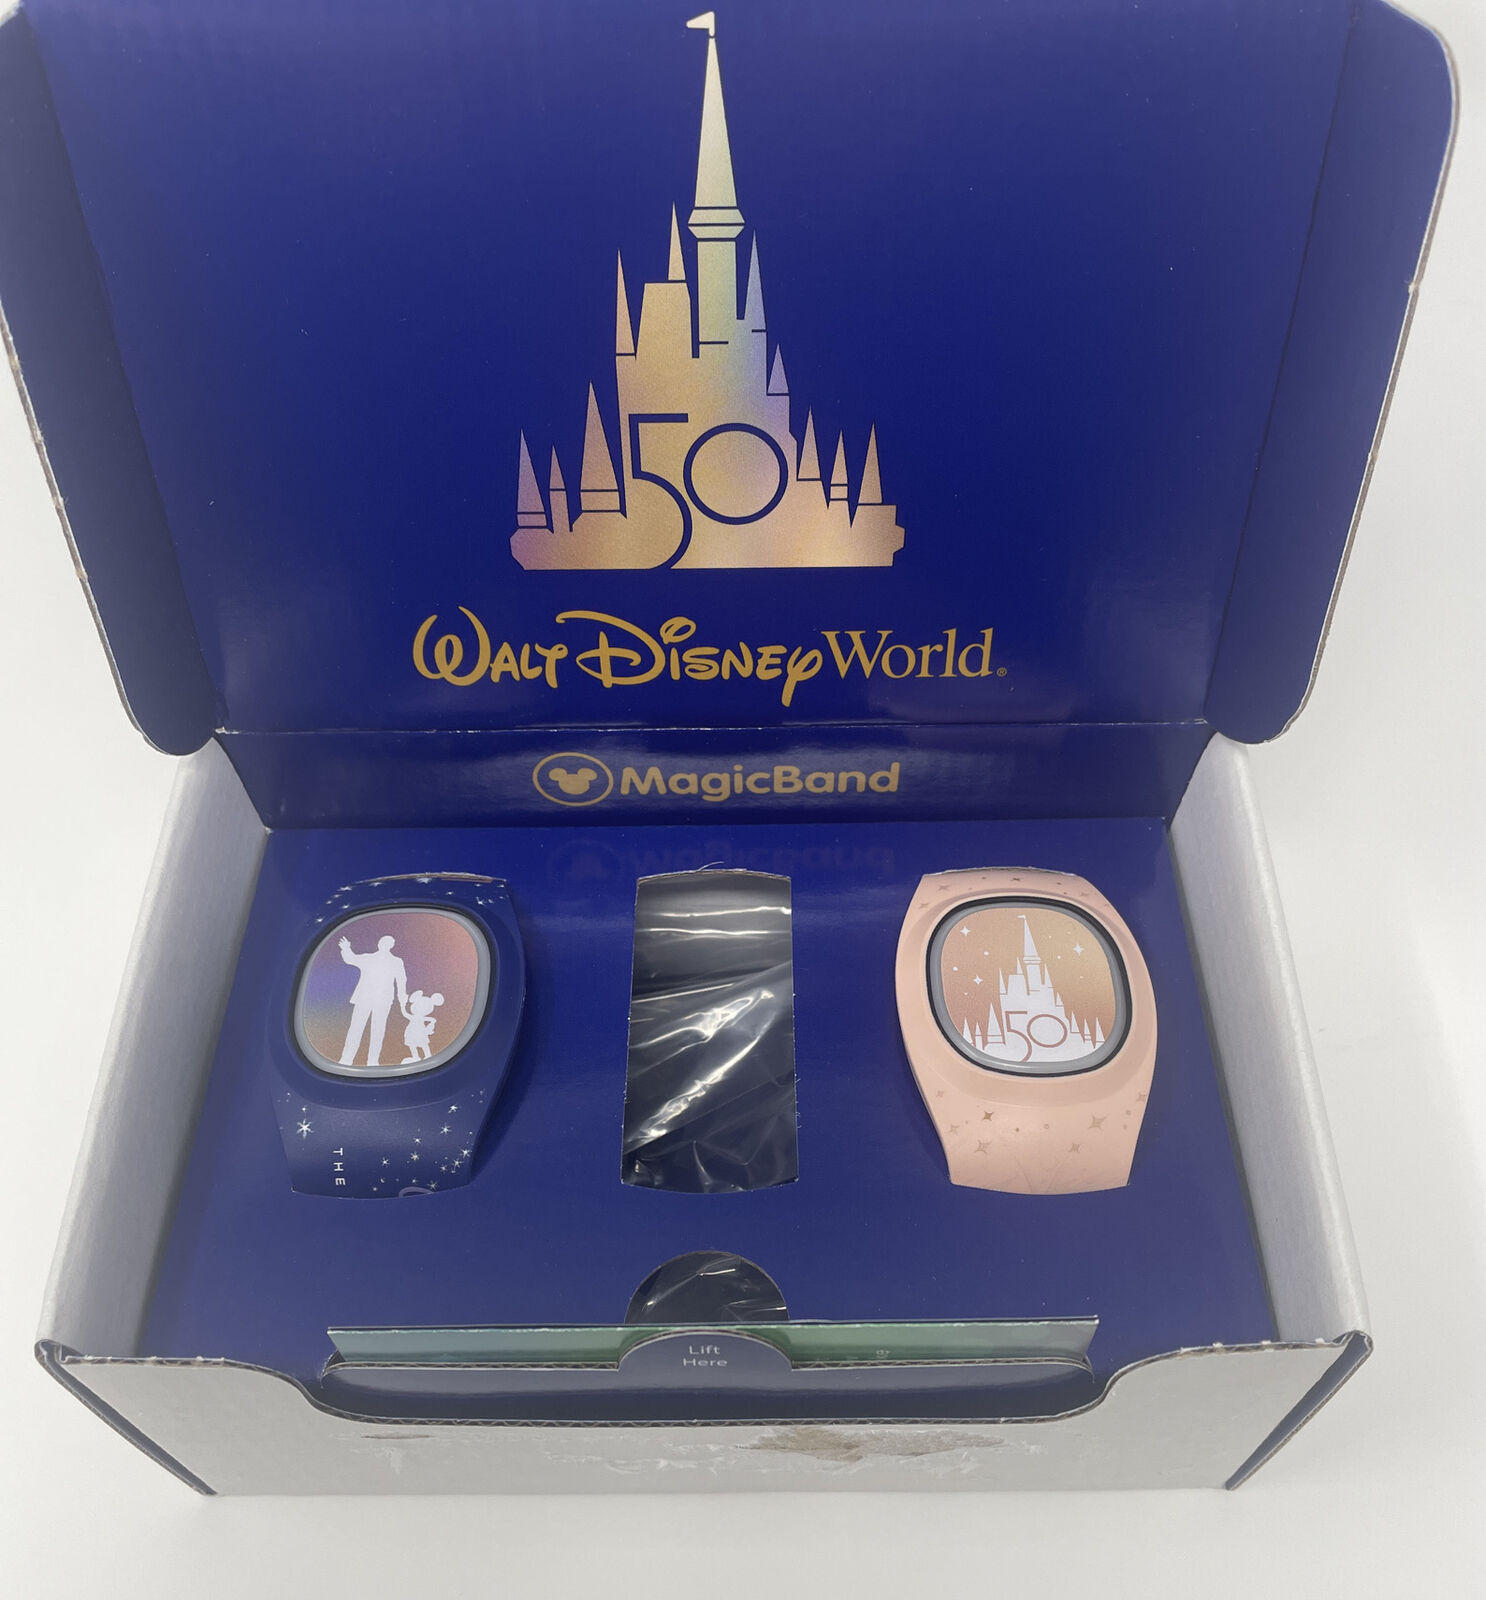 New Disney Parks 50th Anniversary Magic Band Plus Set of 2 Unlinked Magicband